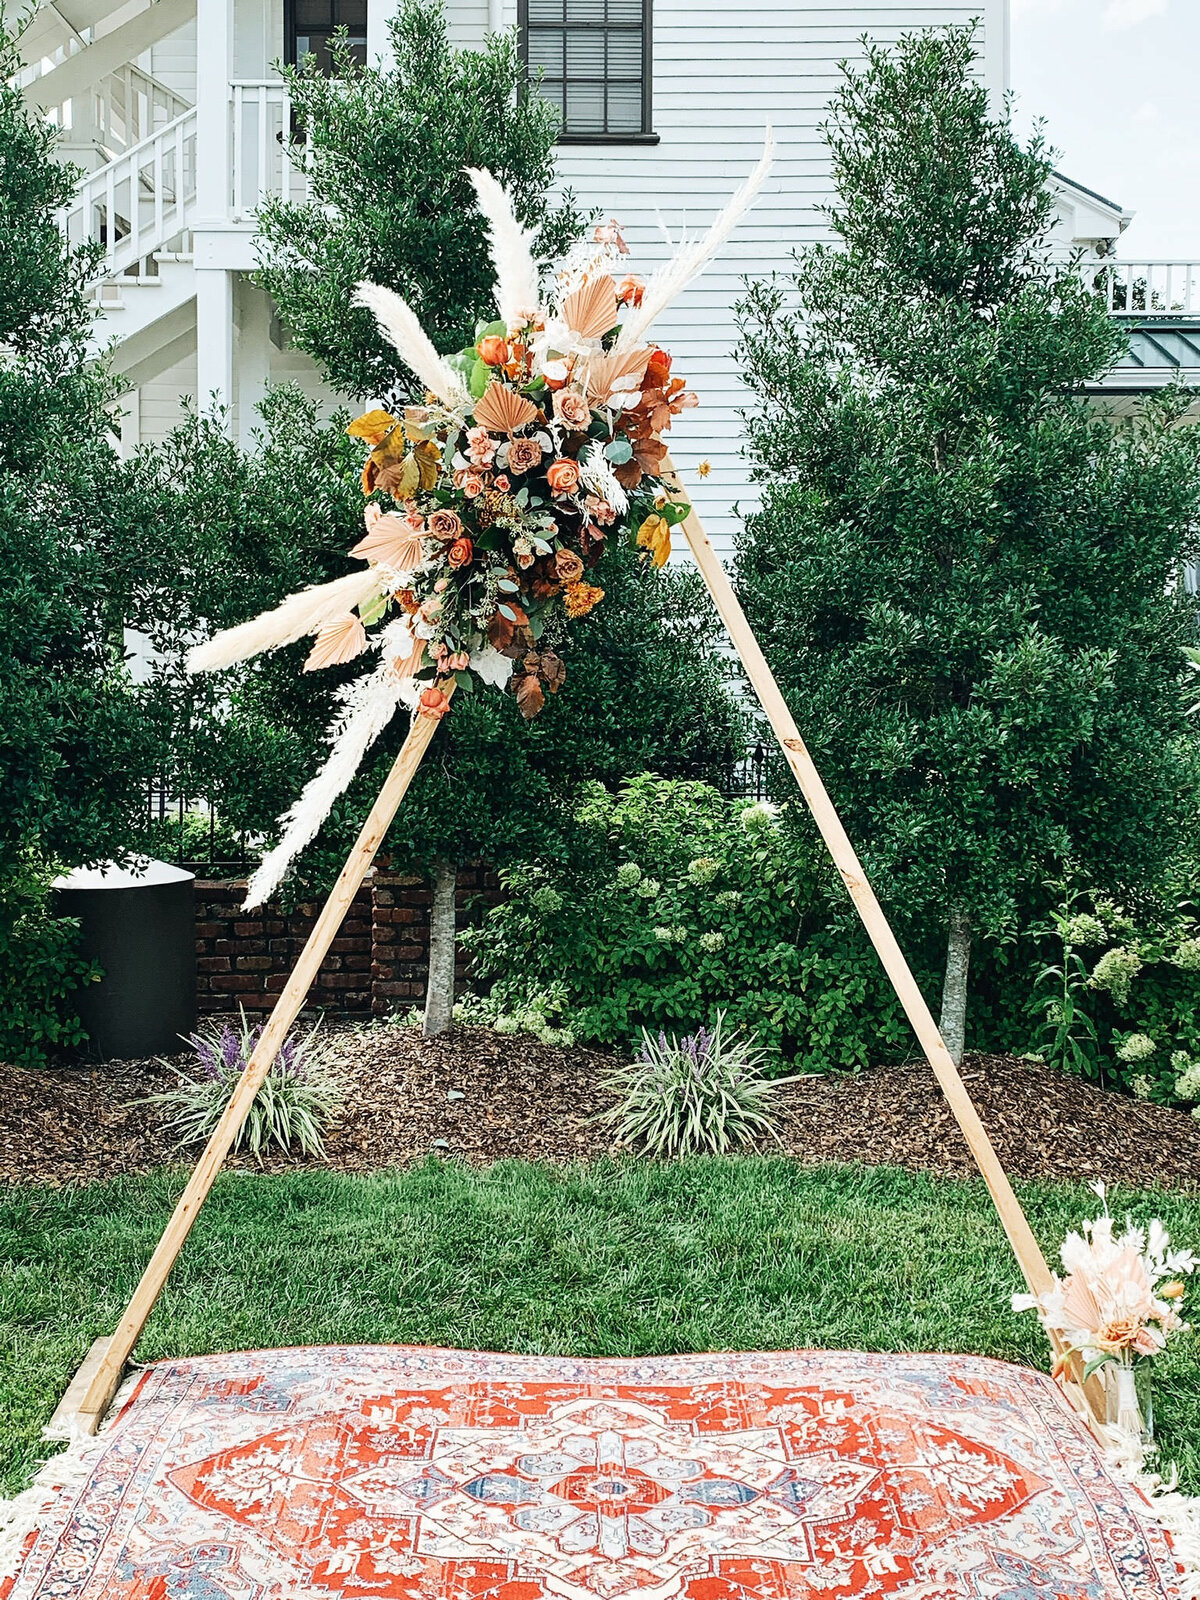 Triangle arbor with arrangement with pampas grass and organic florals in tones of terracotta